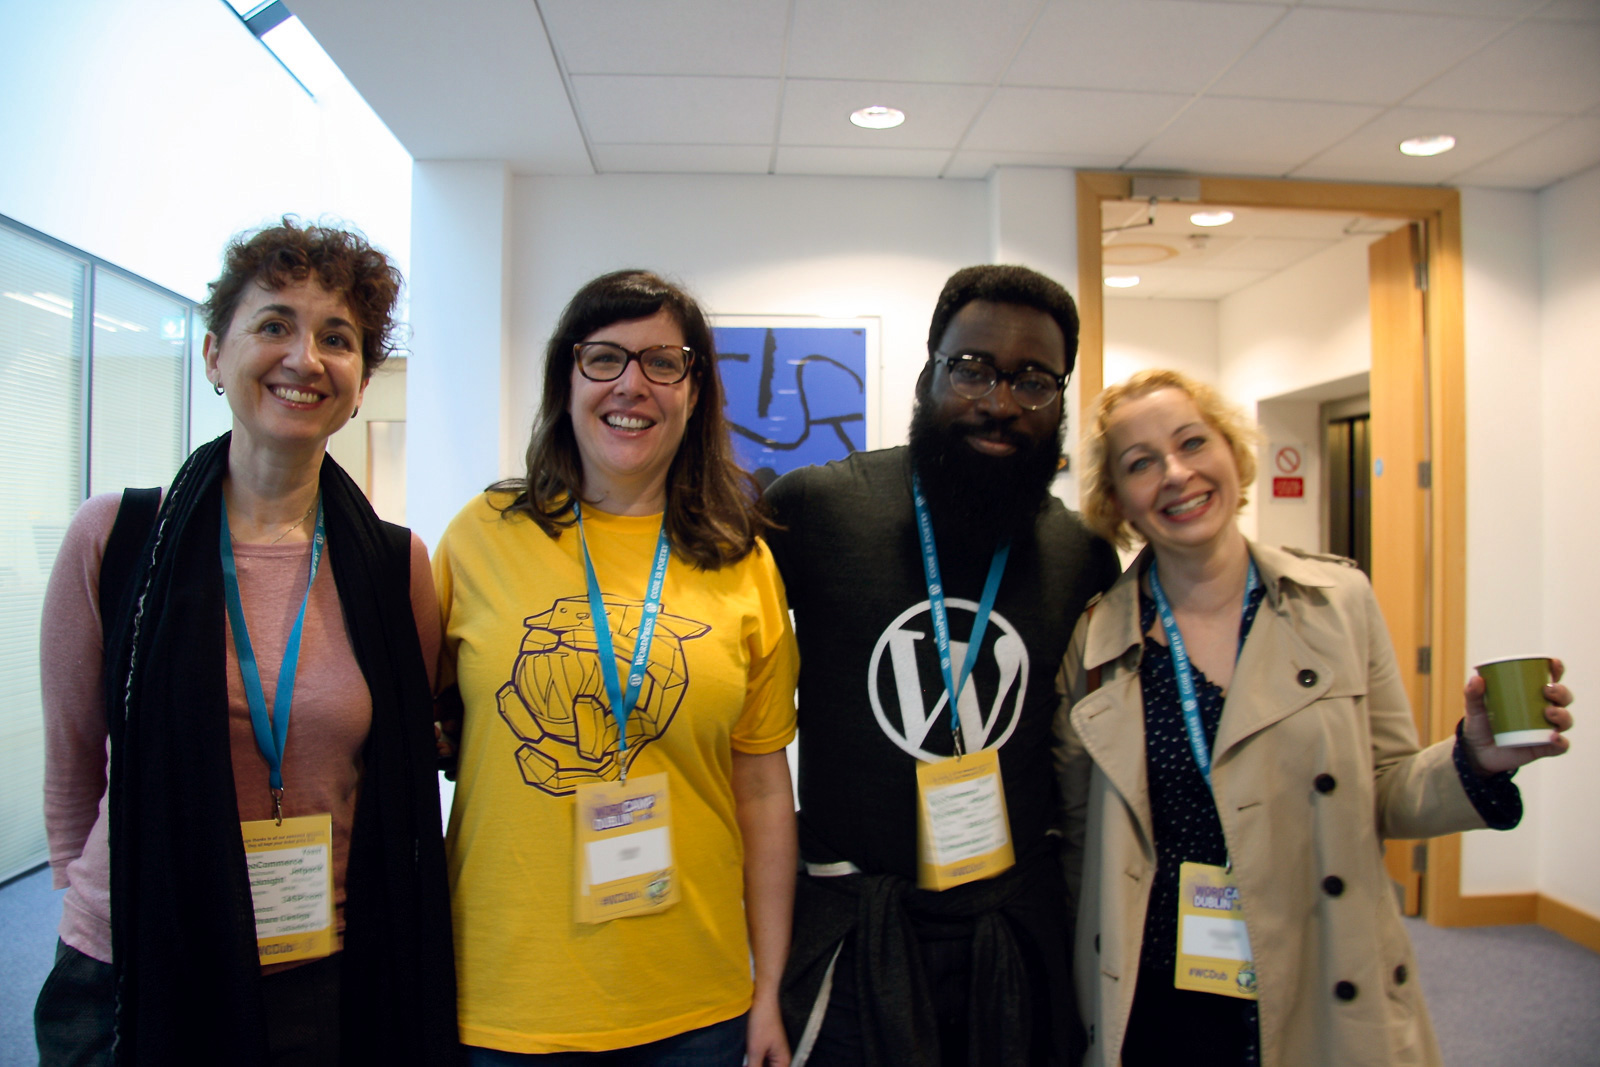 Four happy people who attended WordCamp Dublin 2017.